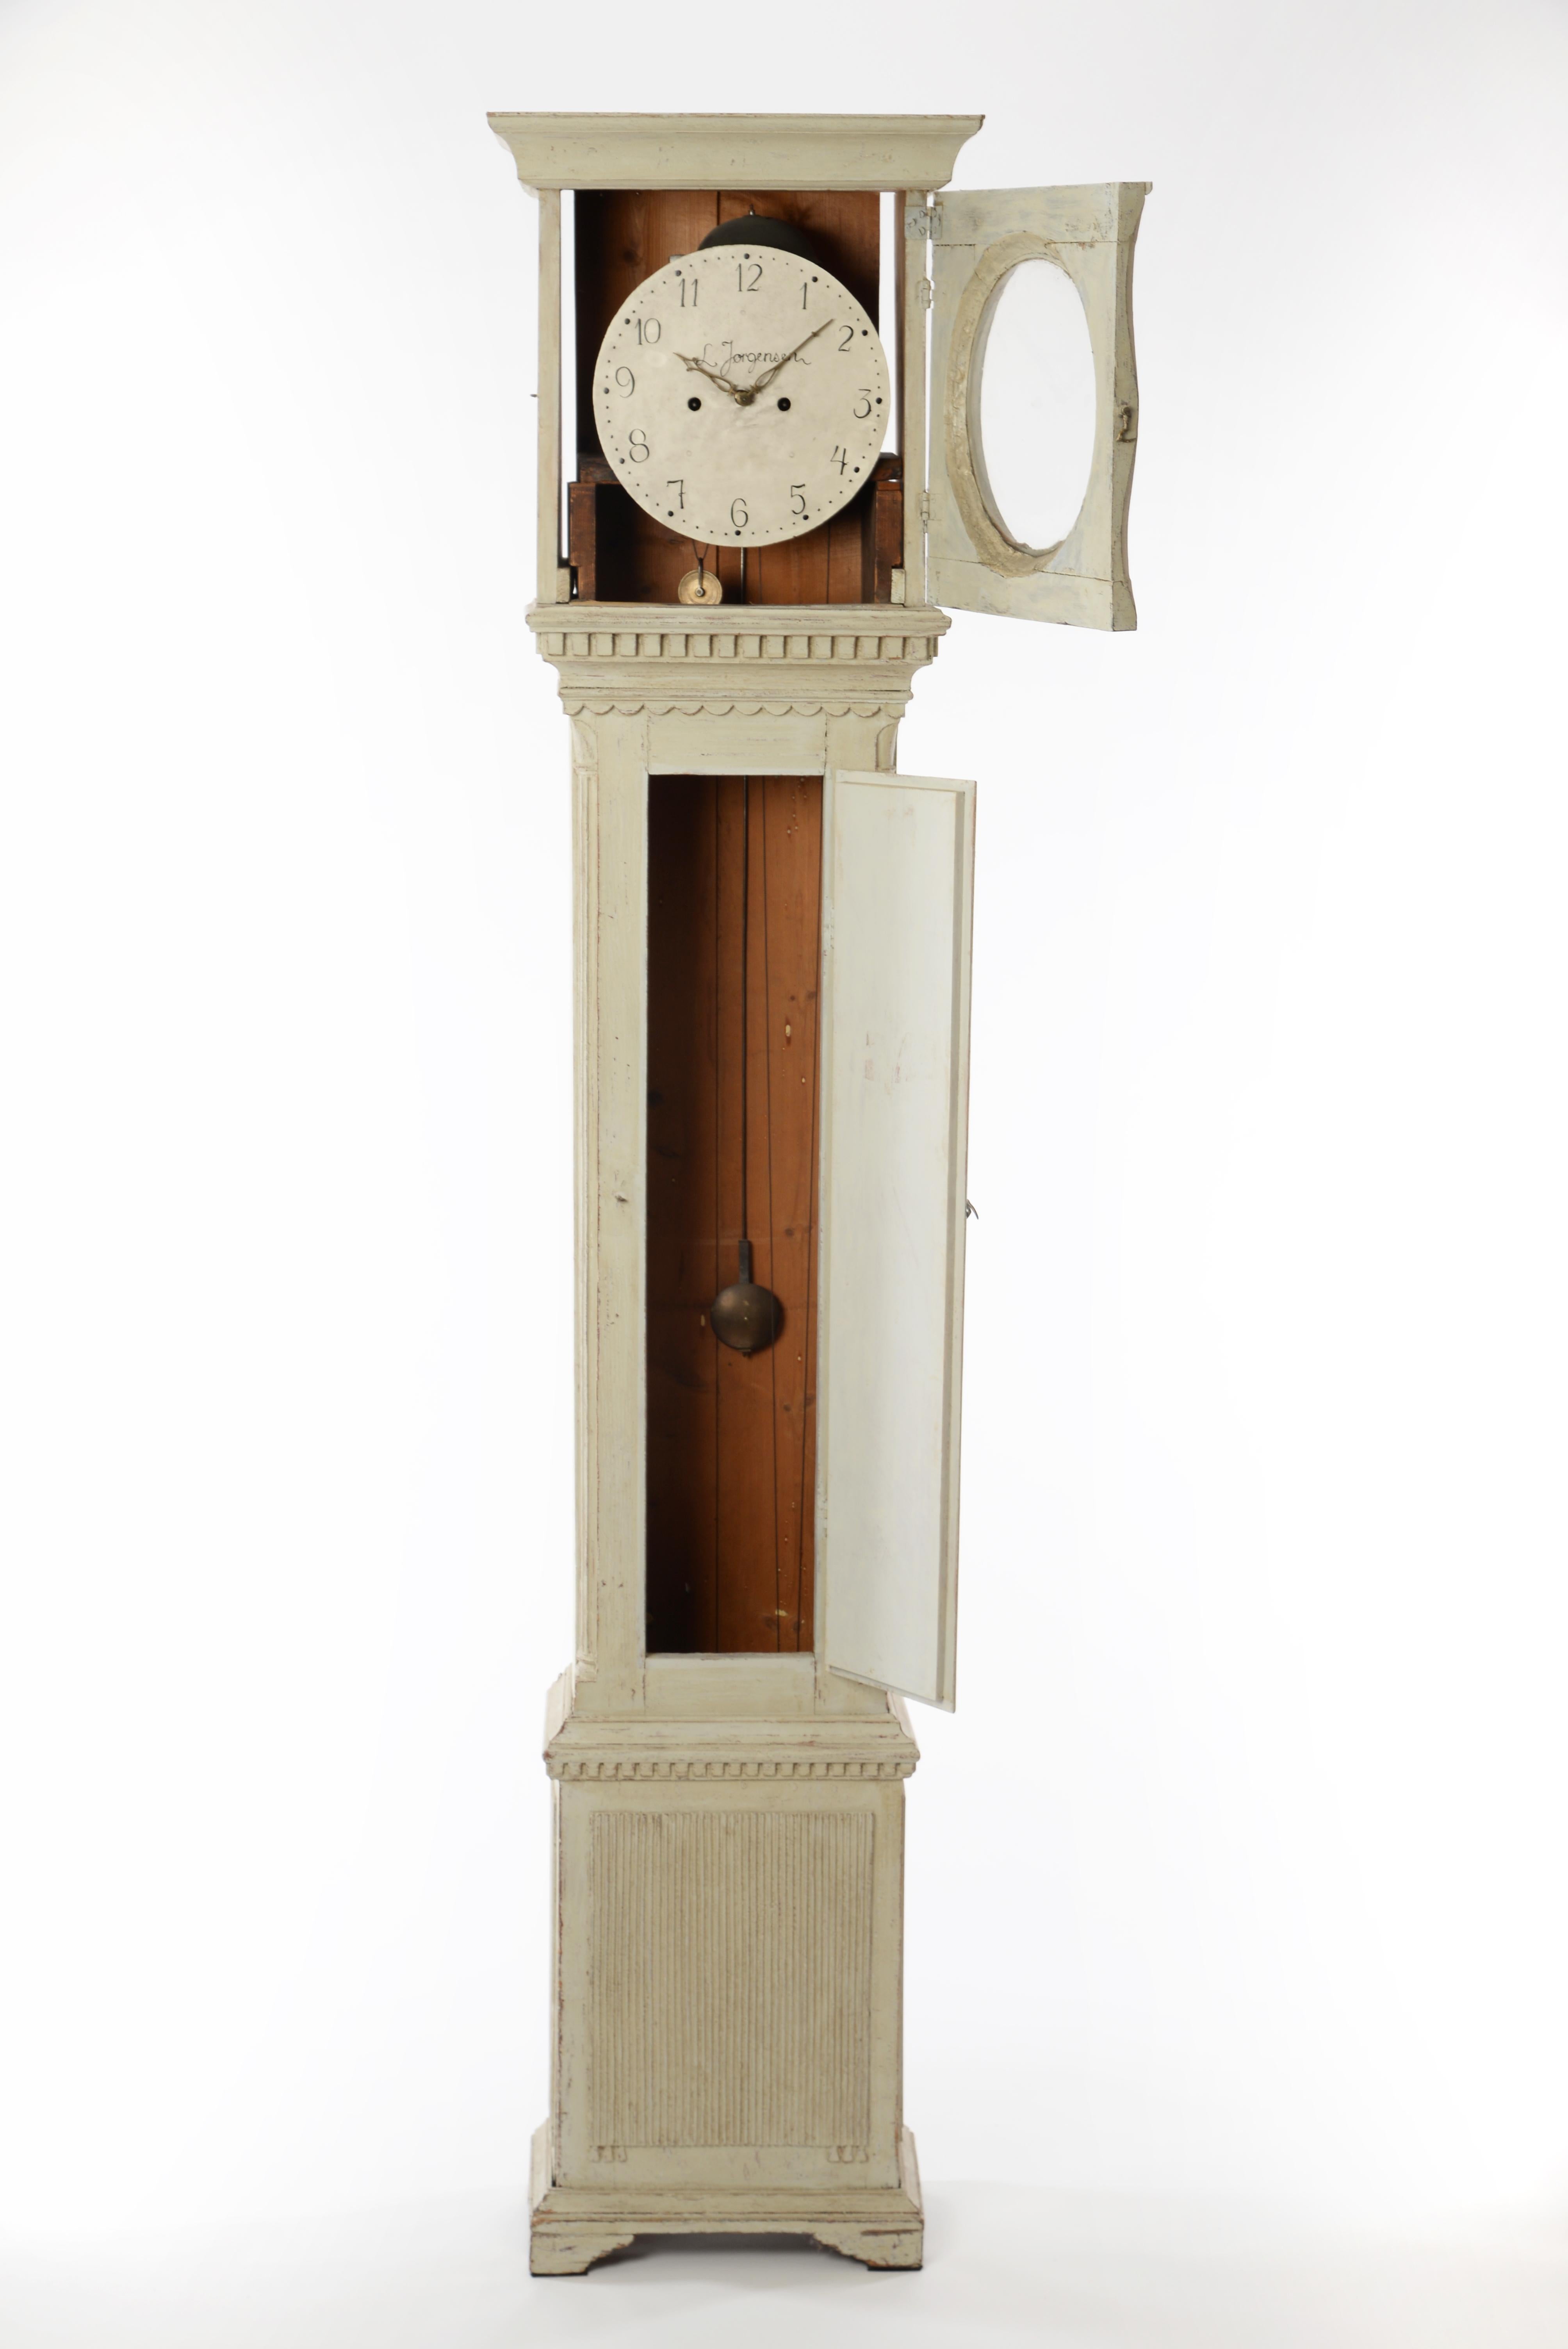 This beautiful Swedish 19th century longcase clock features very clean, straight and simple lines. The decorations are exquisite yet subtle. The face shows traditional numerals and retains it's original metal face, hands and movement. The face shows